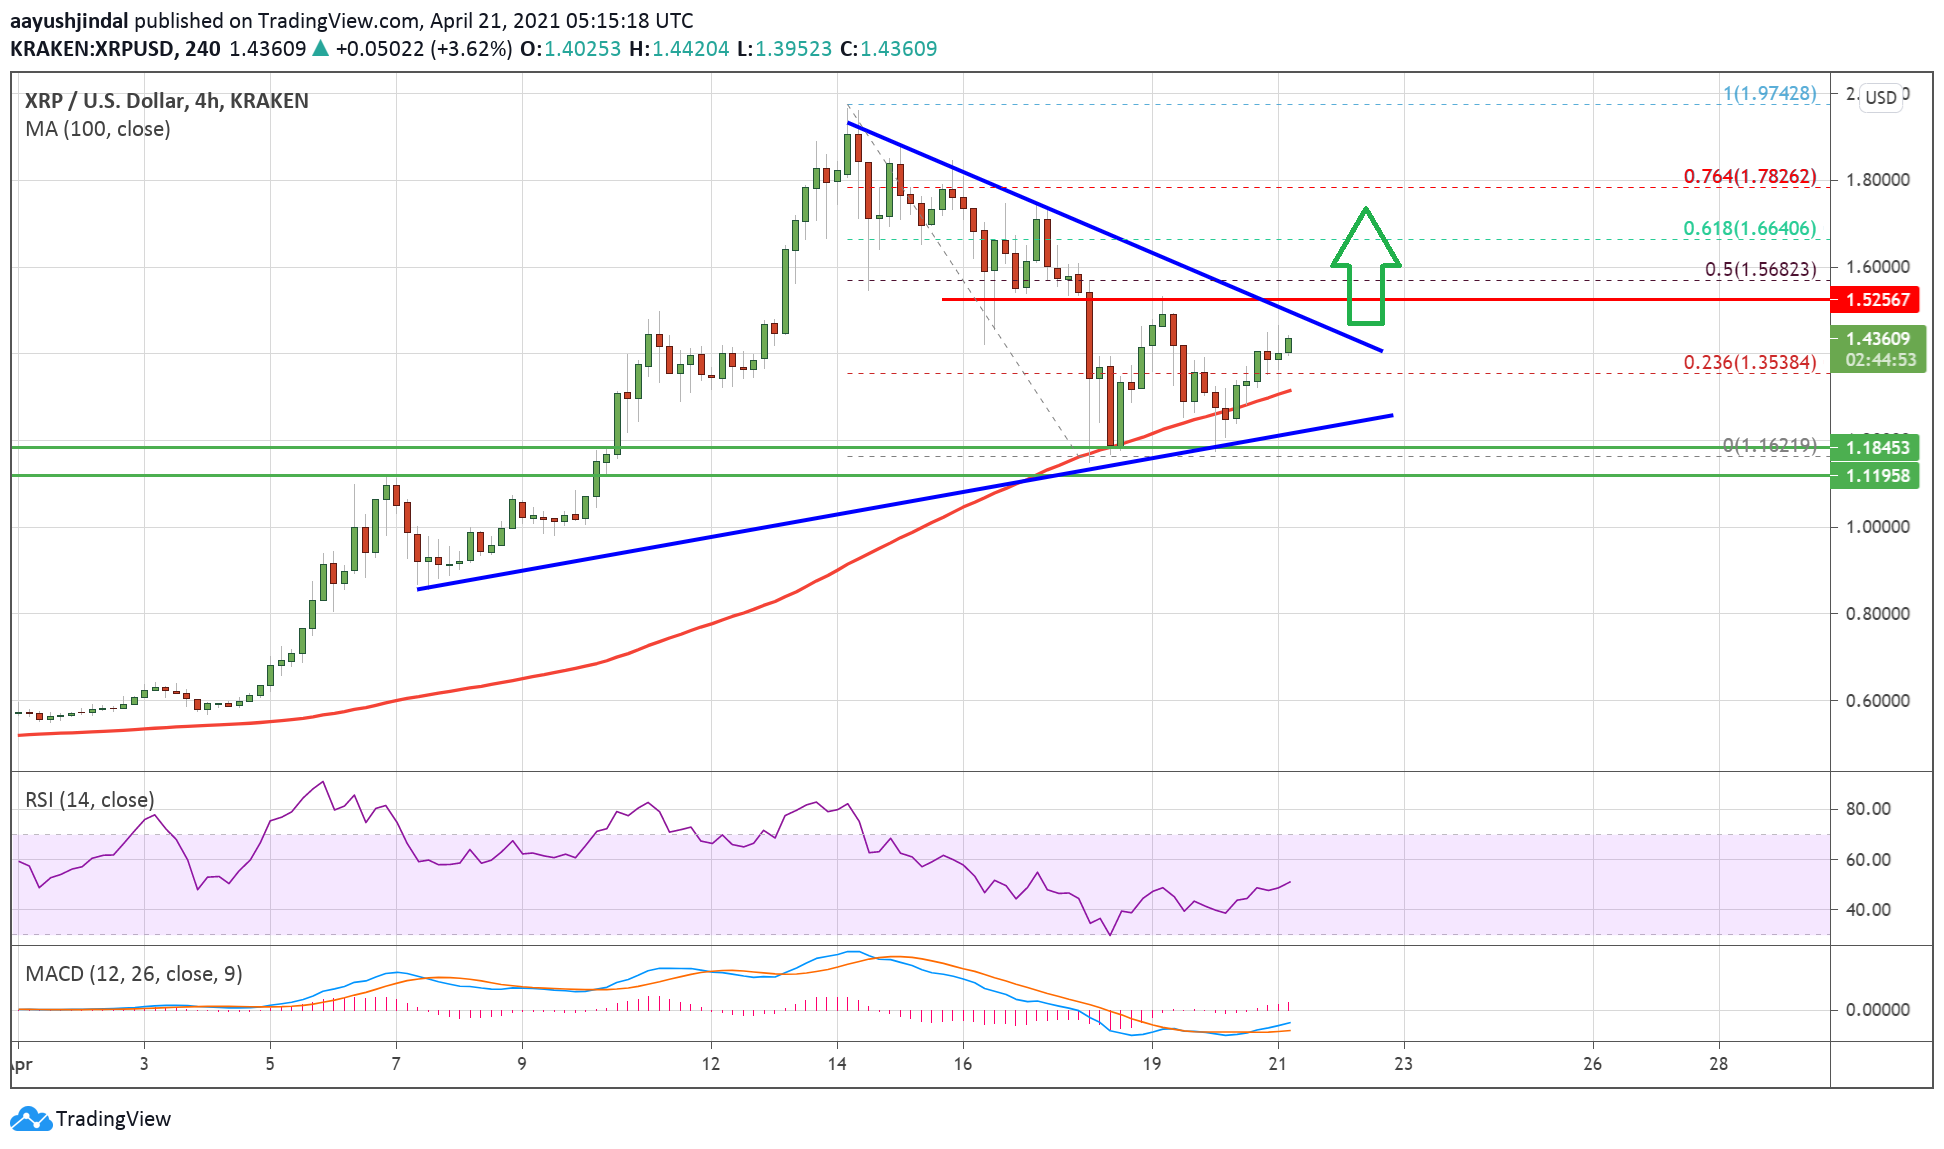 Charted: Ripple (XRP) Could Rally Significantly If It Clears This Key Resistance